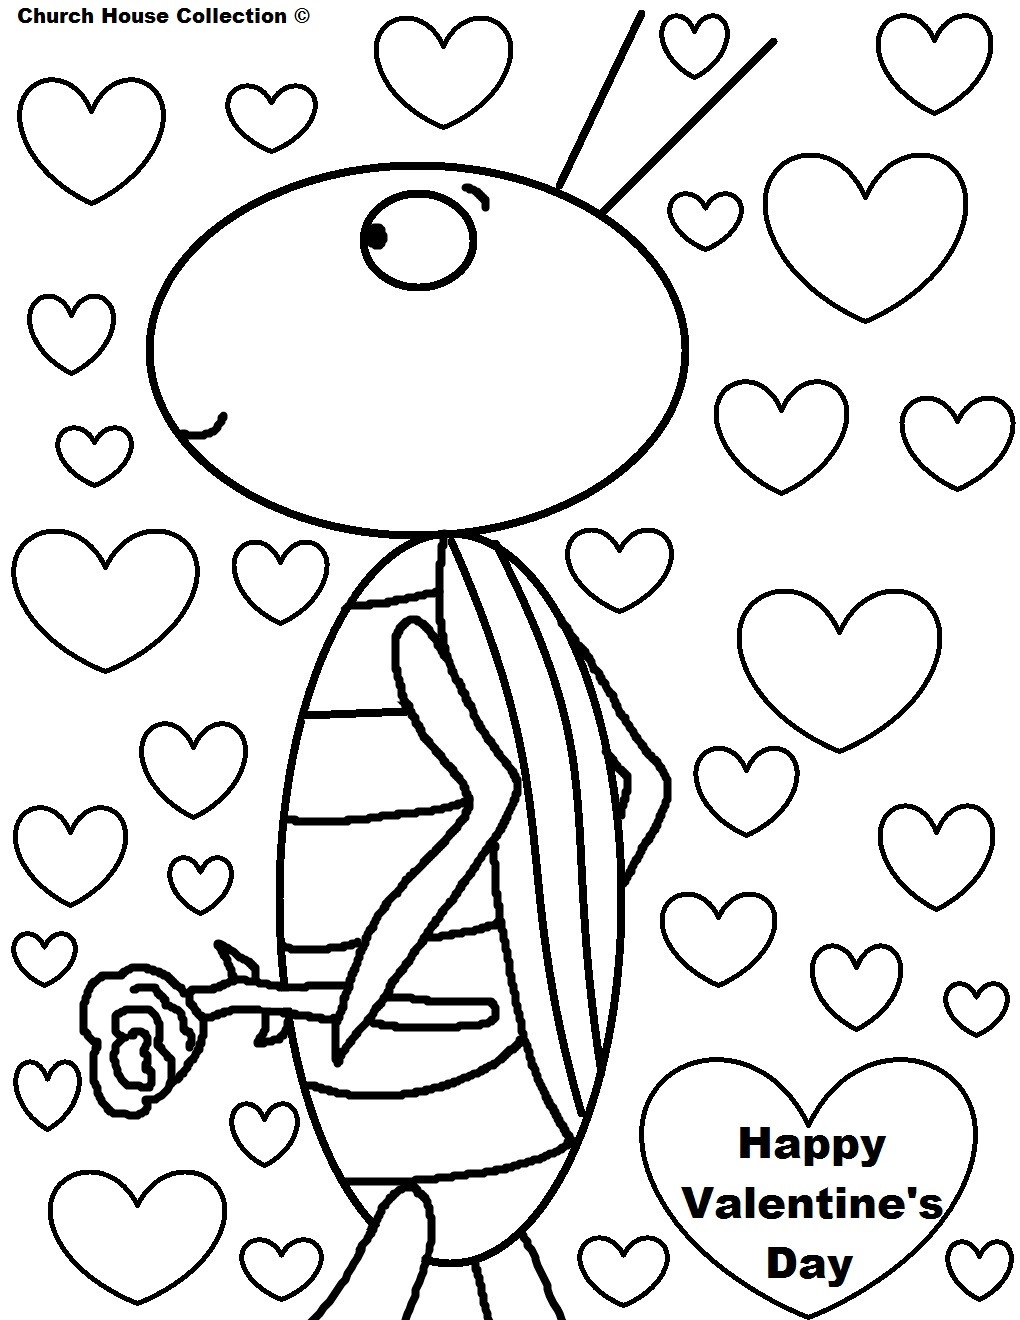 Valentine Day Coloring Pages Printable
 Church House Collection Blog Valentine s Day Coloring